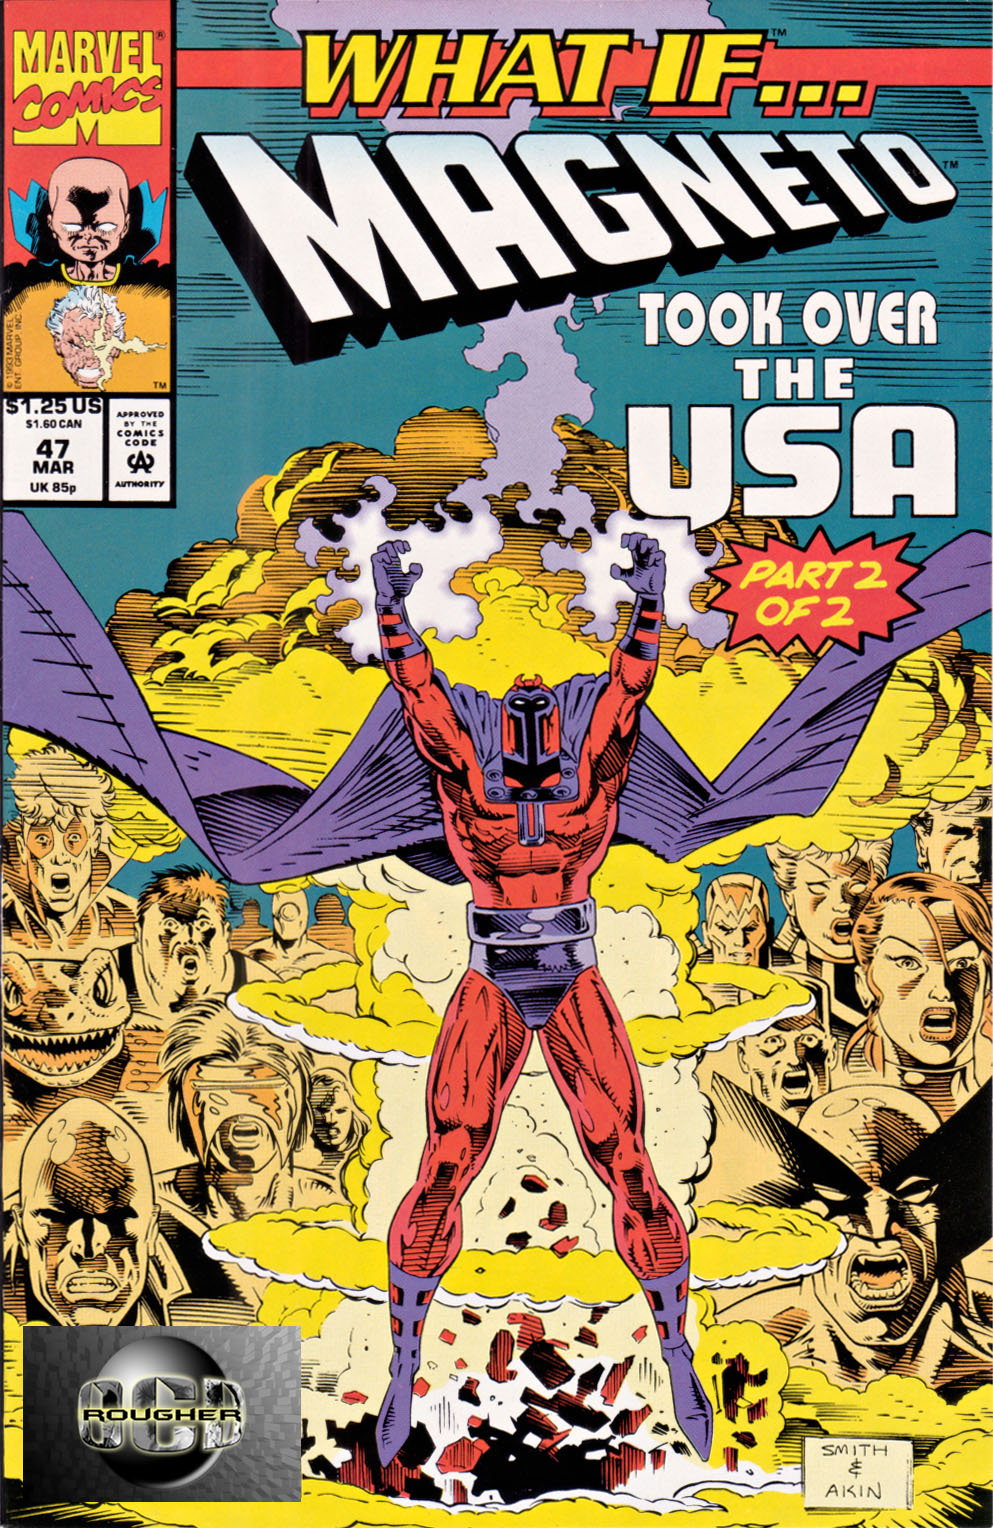 What If V2 047 Magneto Took Over The Usa